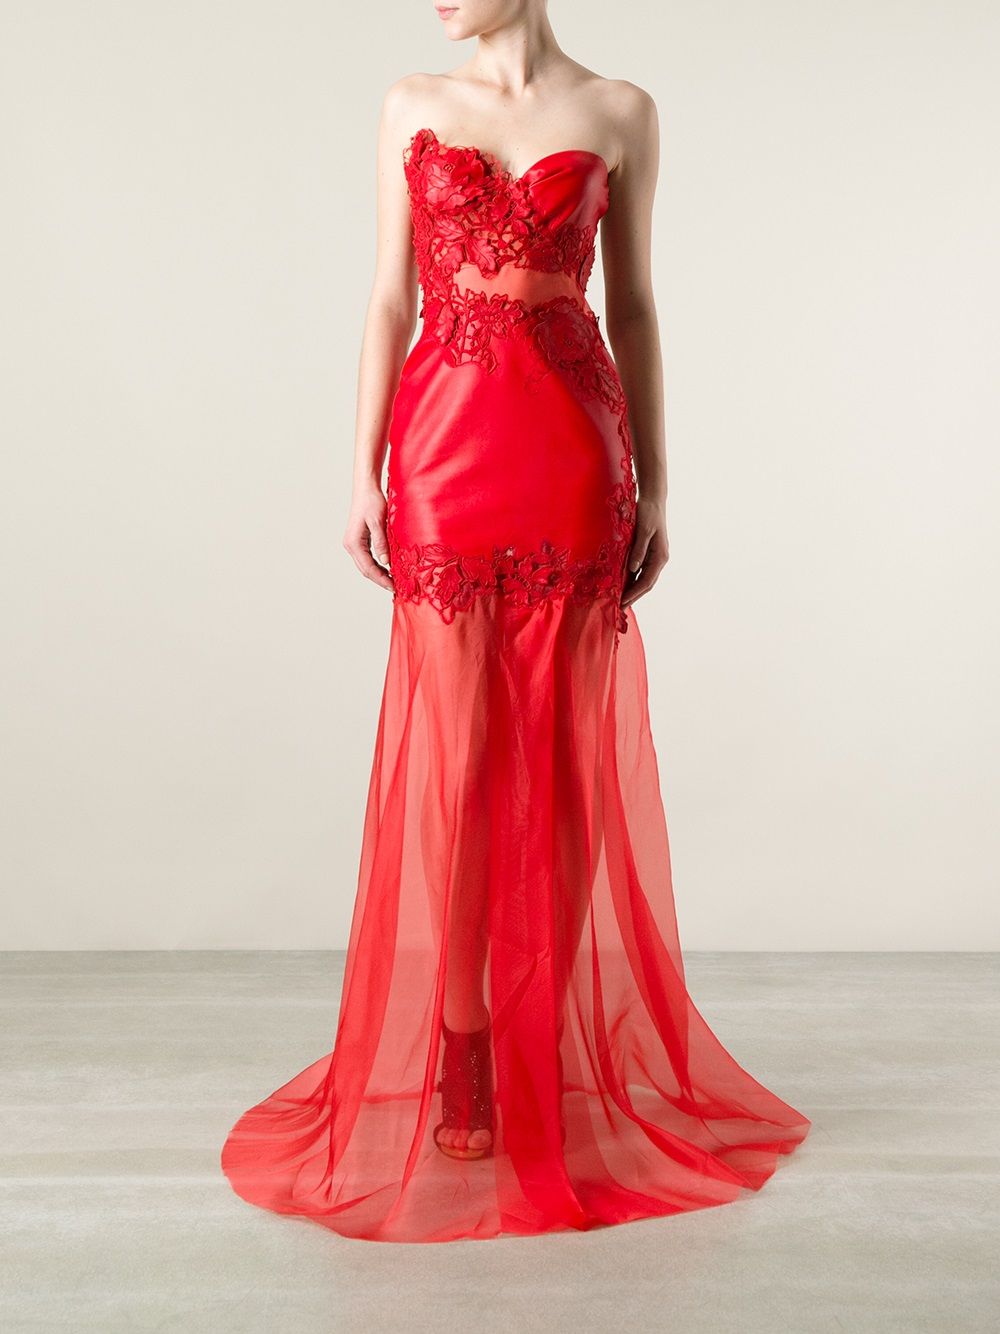 Lyst - Ermanno scervino Floral Lace Gown in Red